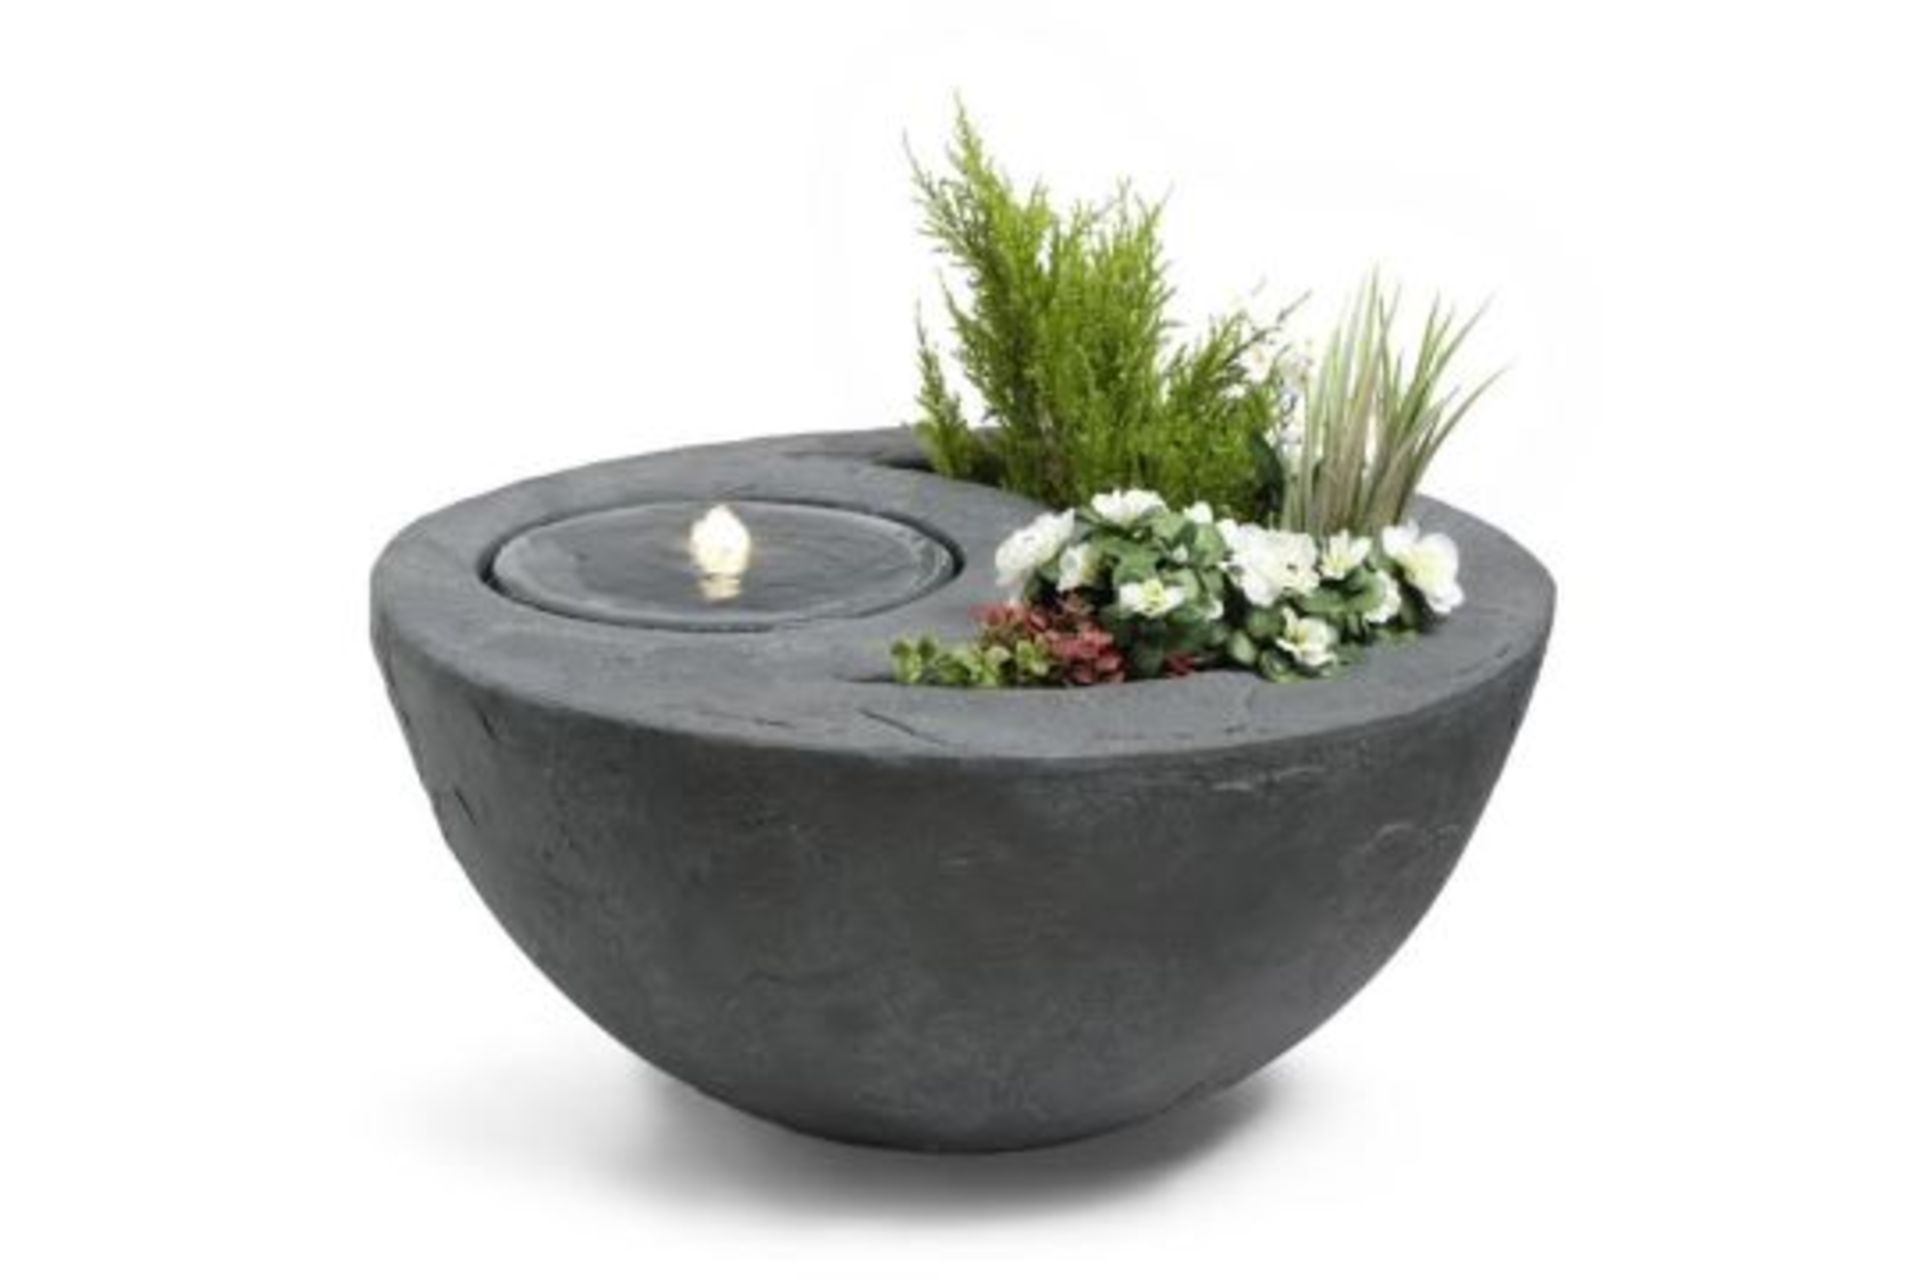 New & Boxed Dual Water Feature and Planter. RRP £299.99 (REF726) - Garden Bowl Design Planter, - Image 6 of 6